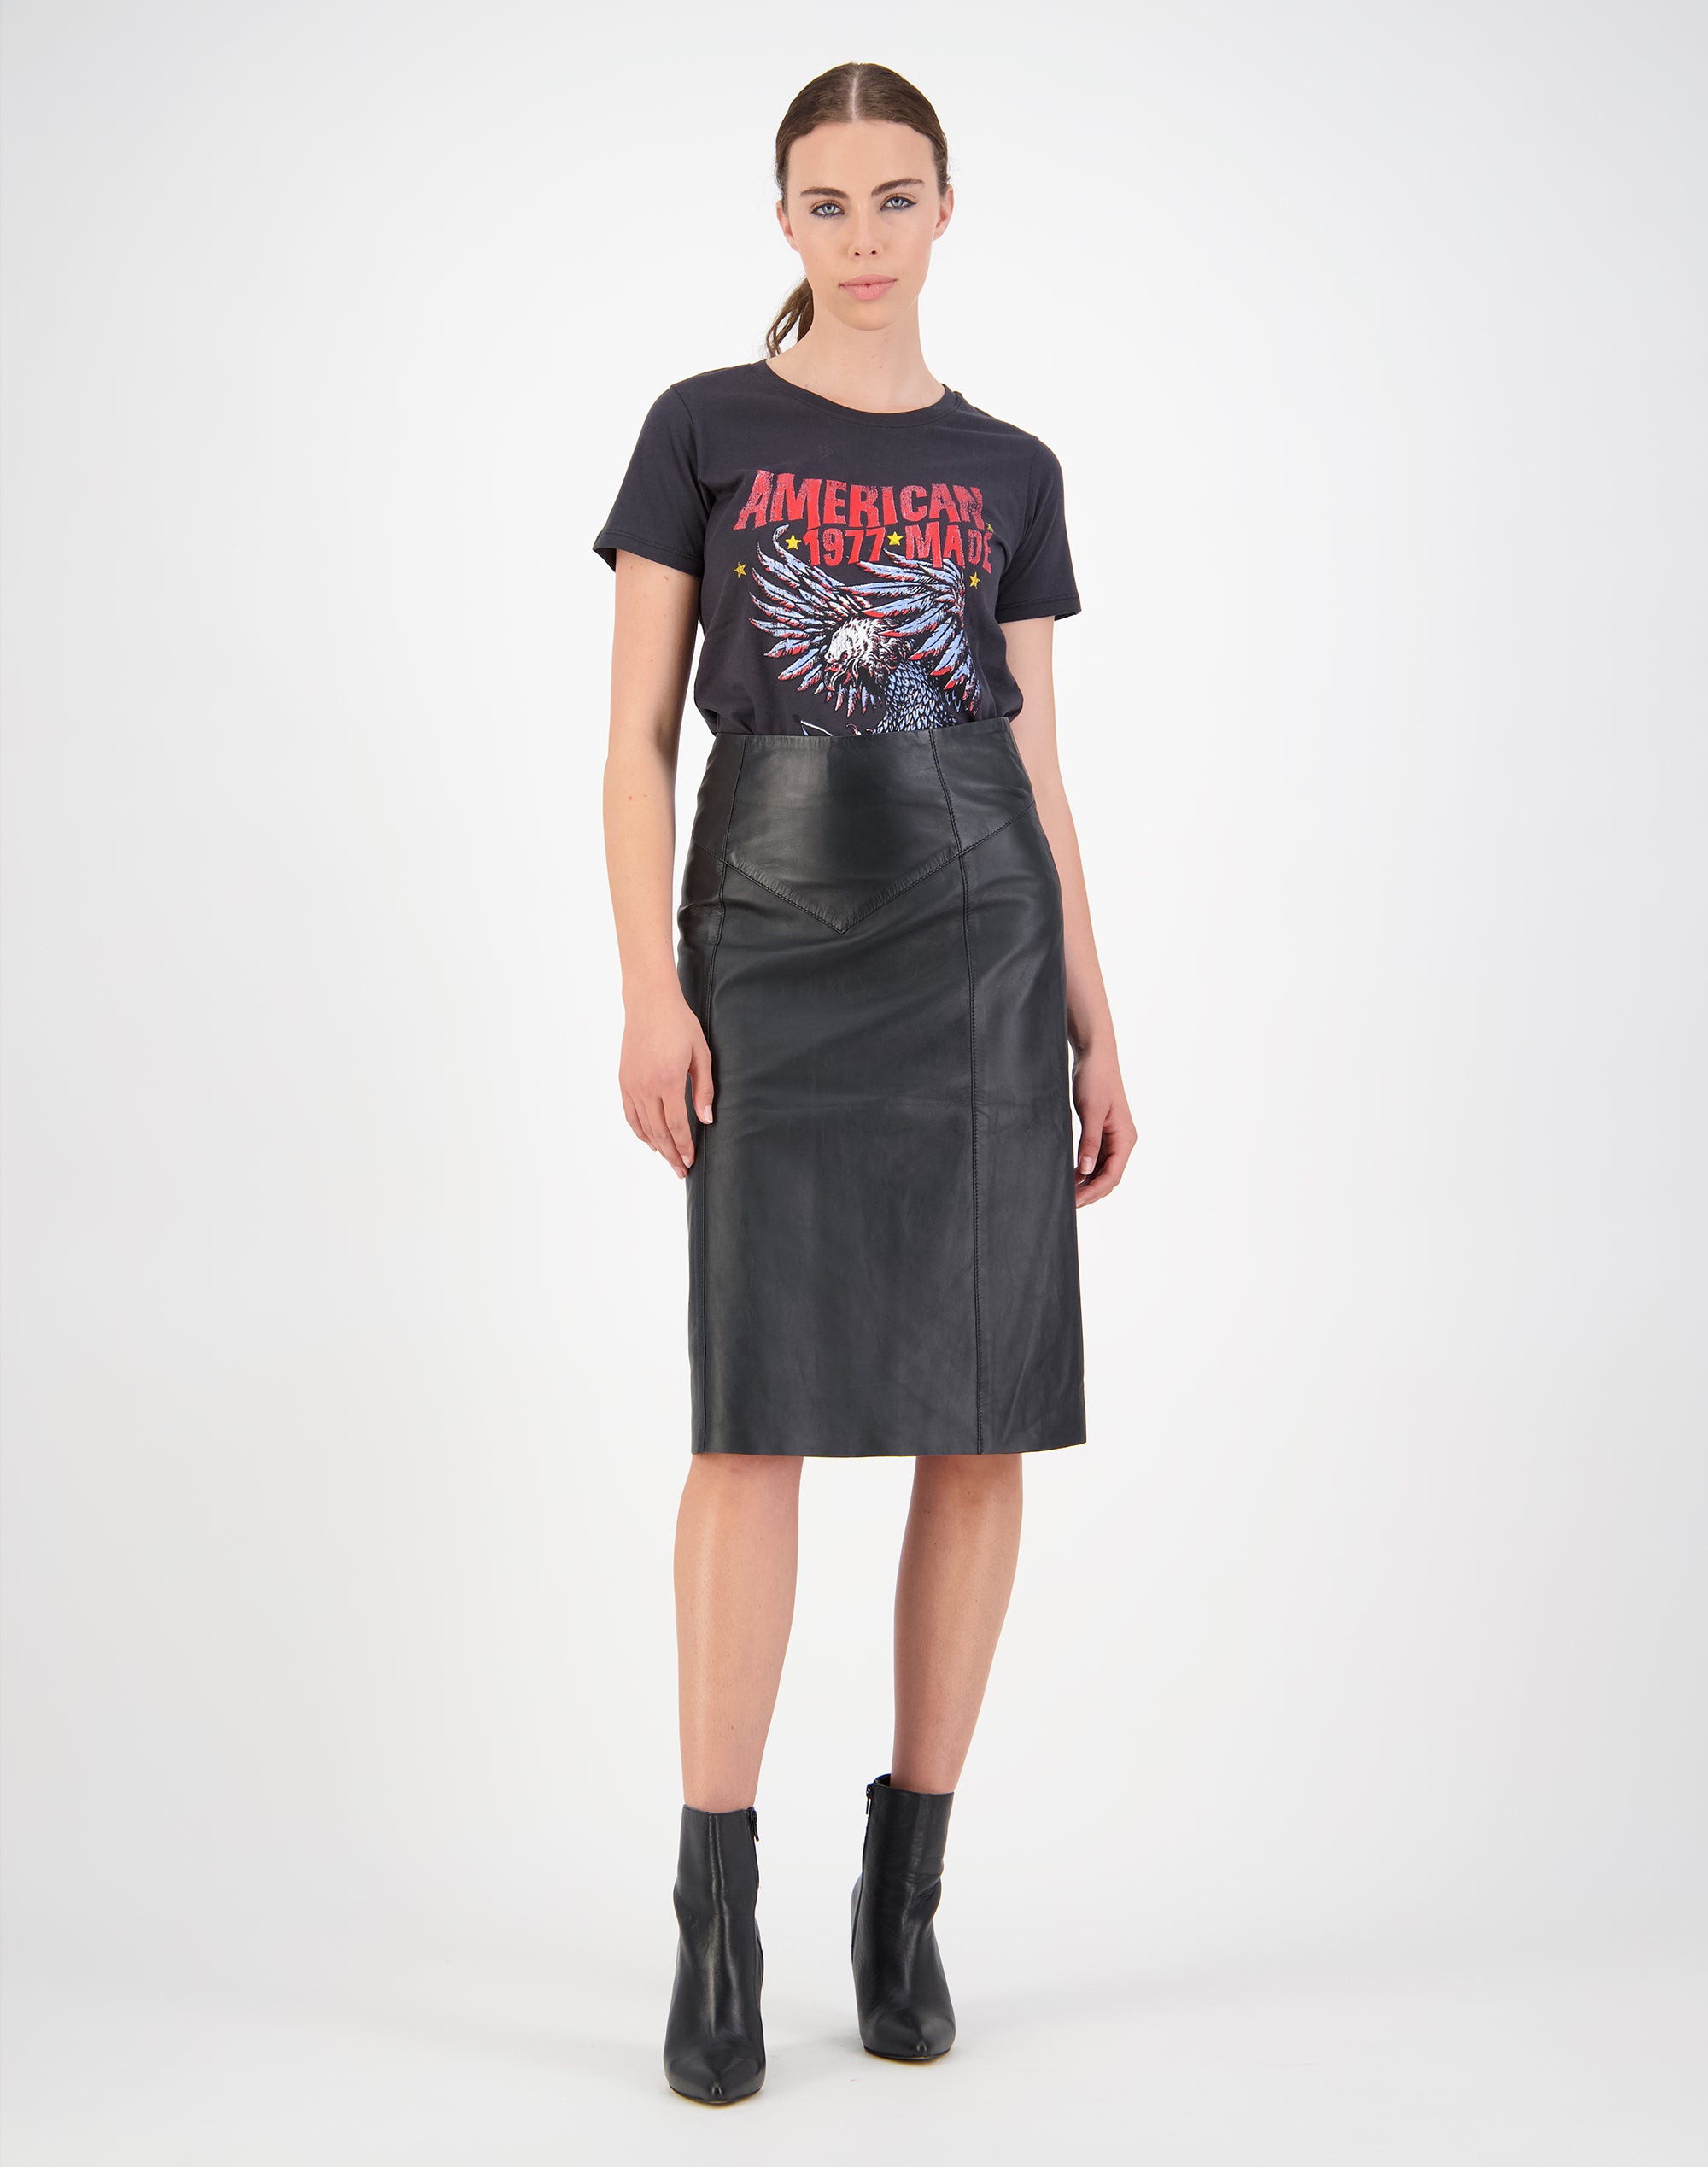 Bowie Leather Skirt